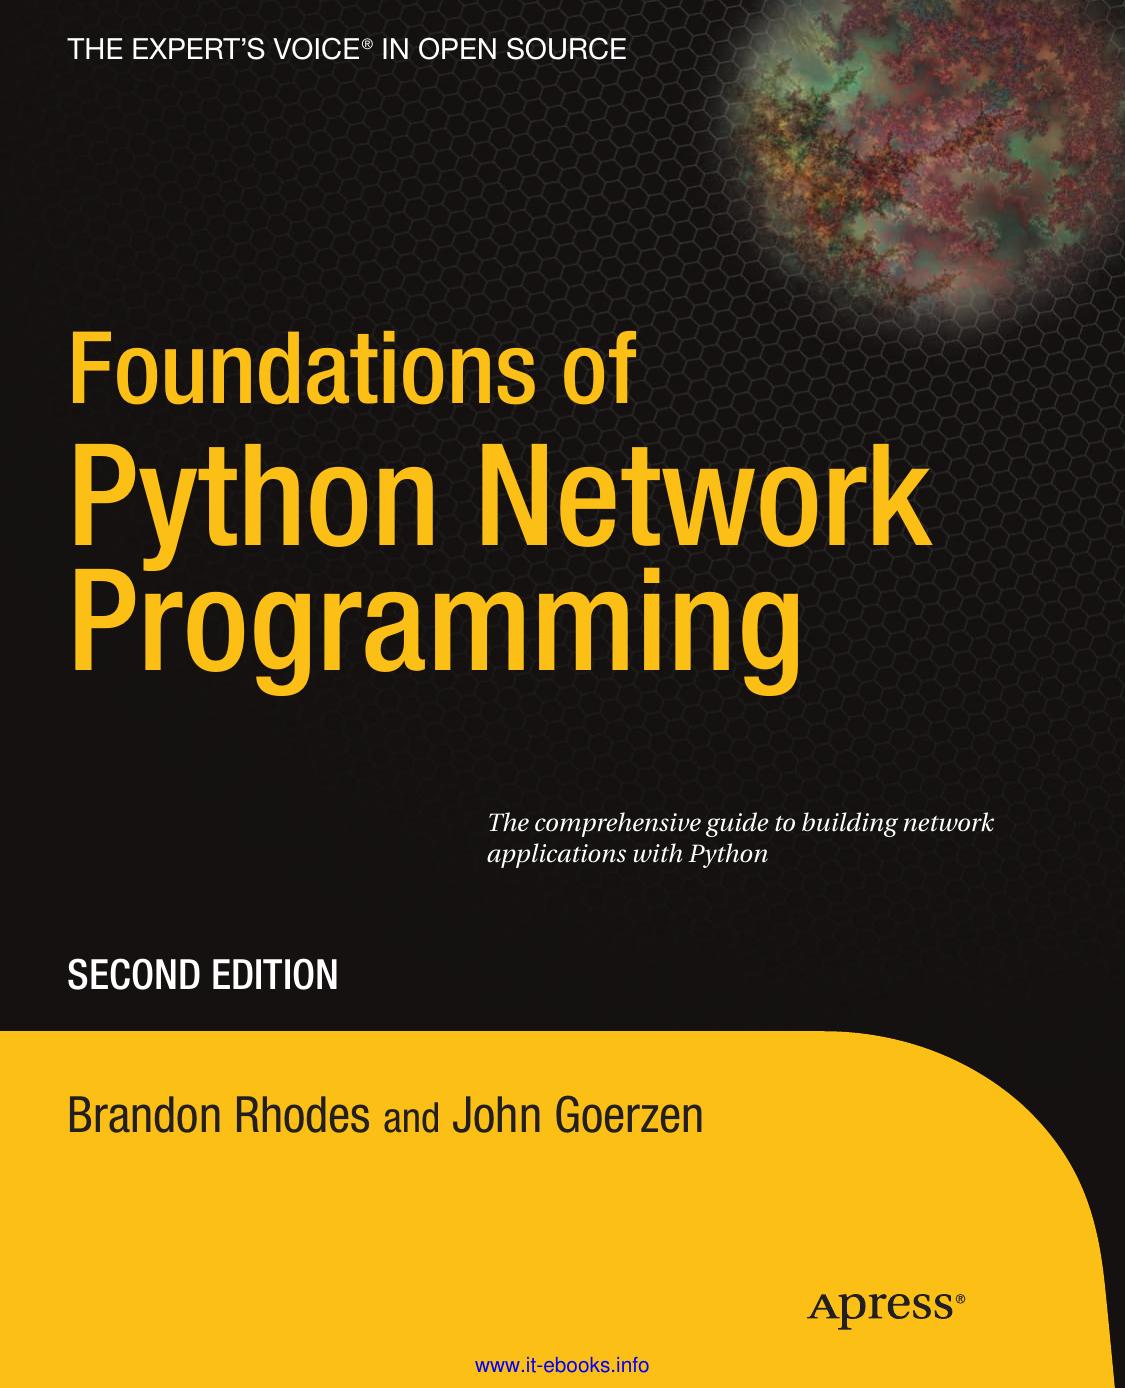 Foundations of Python Network Programming: The Comprehensive Guide to Building Network Applications With Python